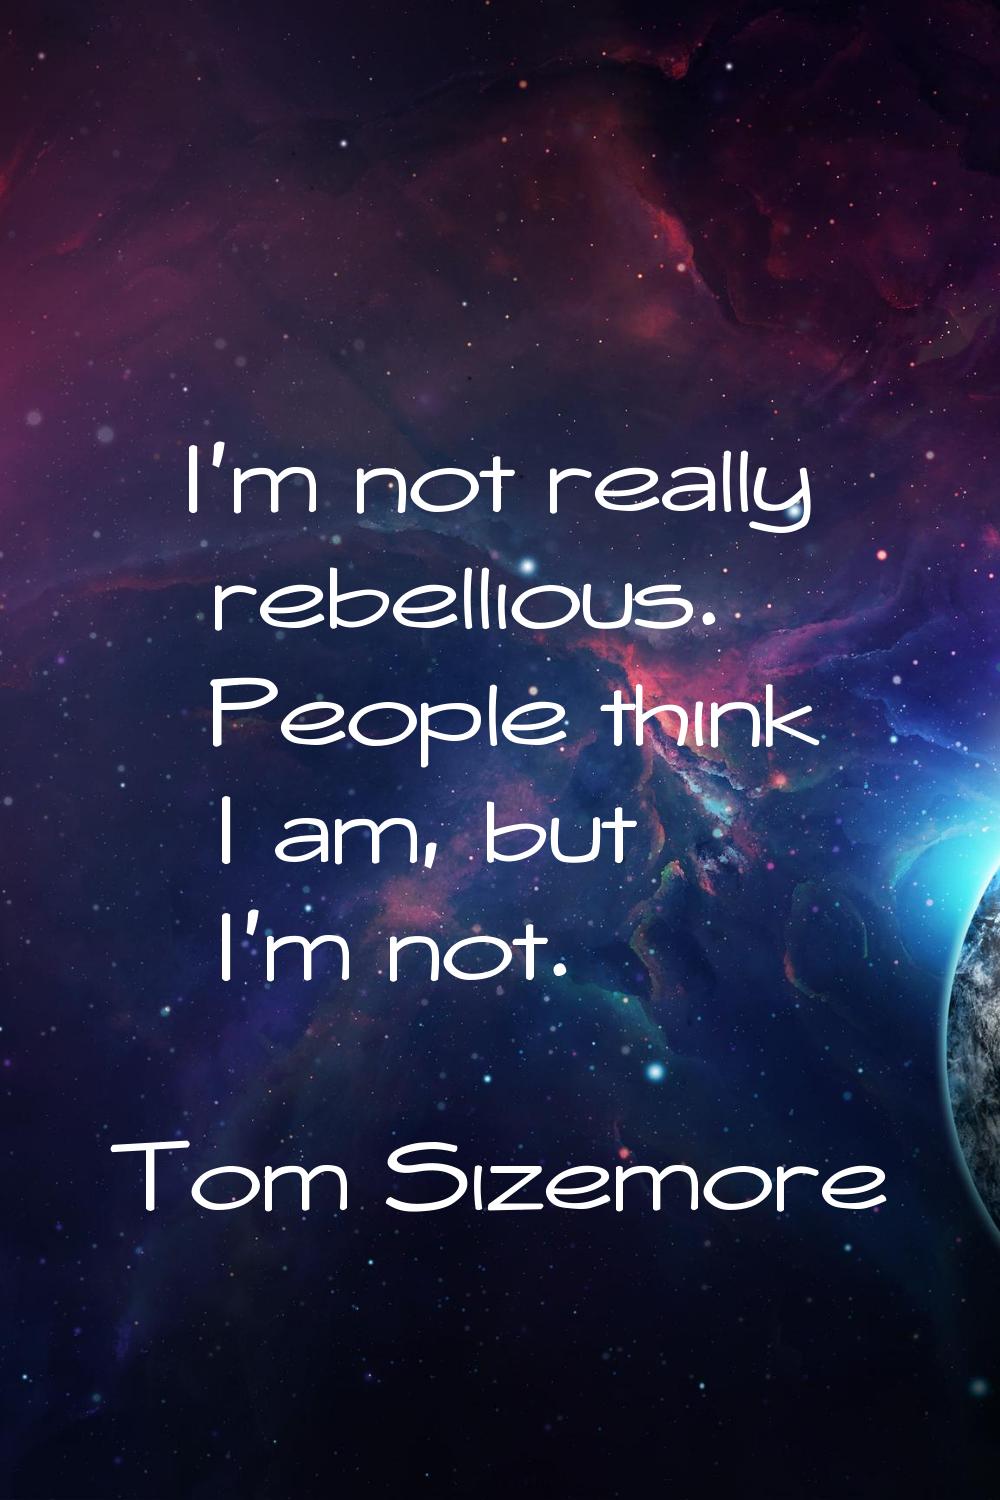 I'm not really rebellious. People think I am, but I'm not.